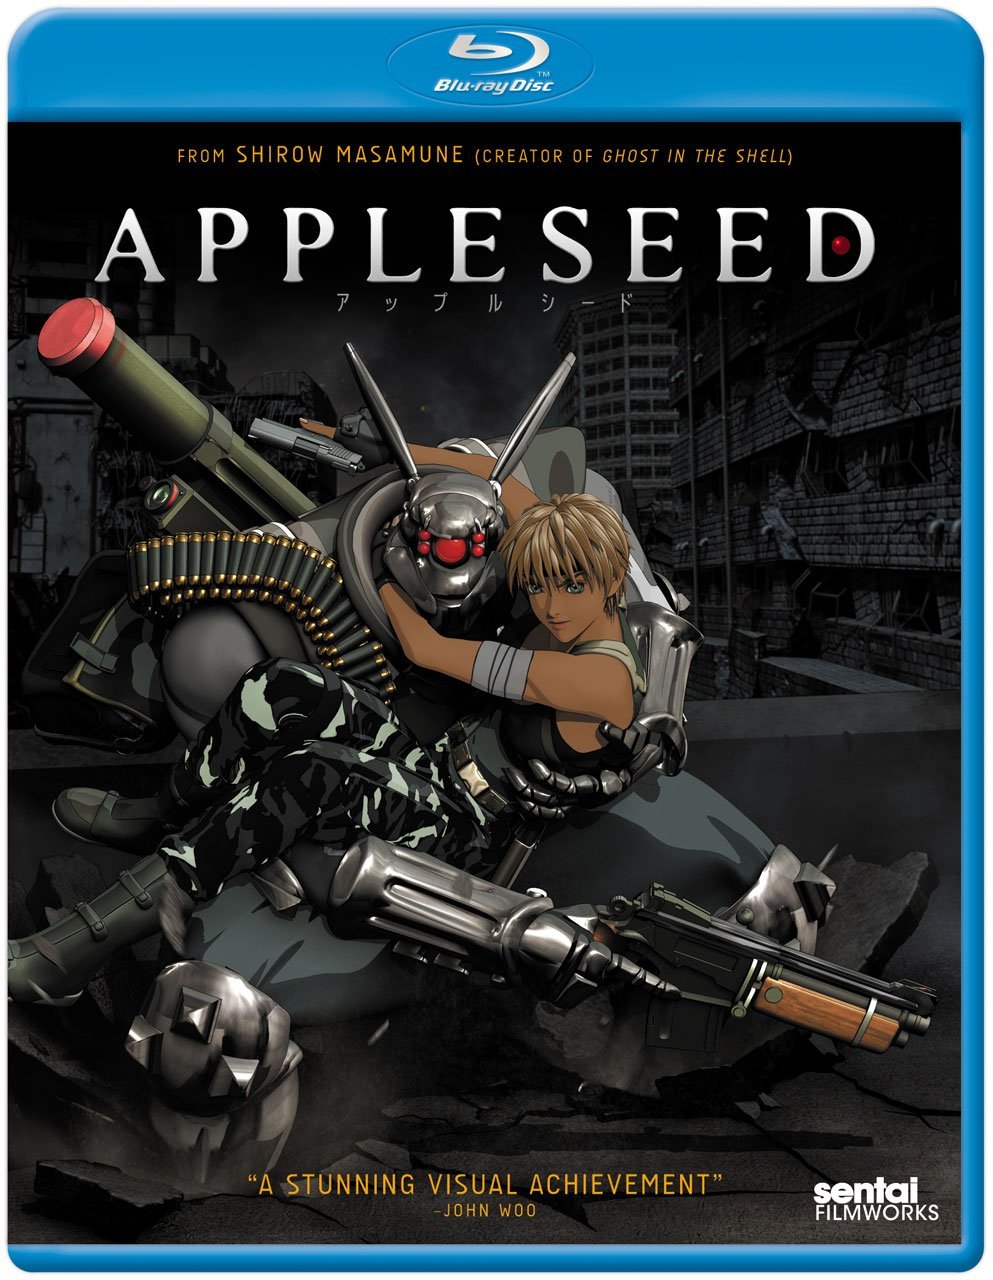 Appleseed (2004) anime movie review • Animefangirl ...